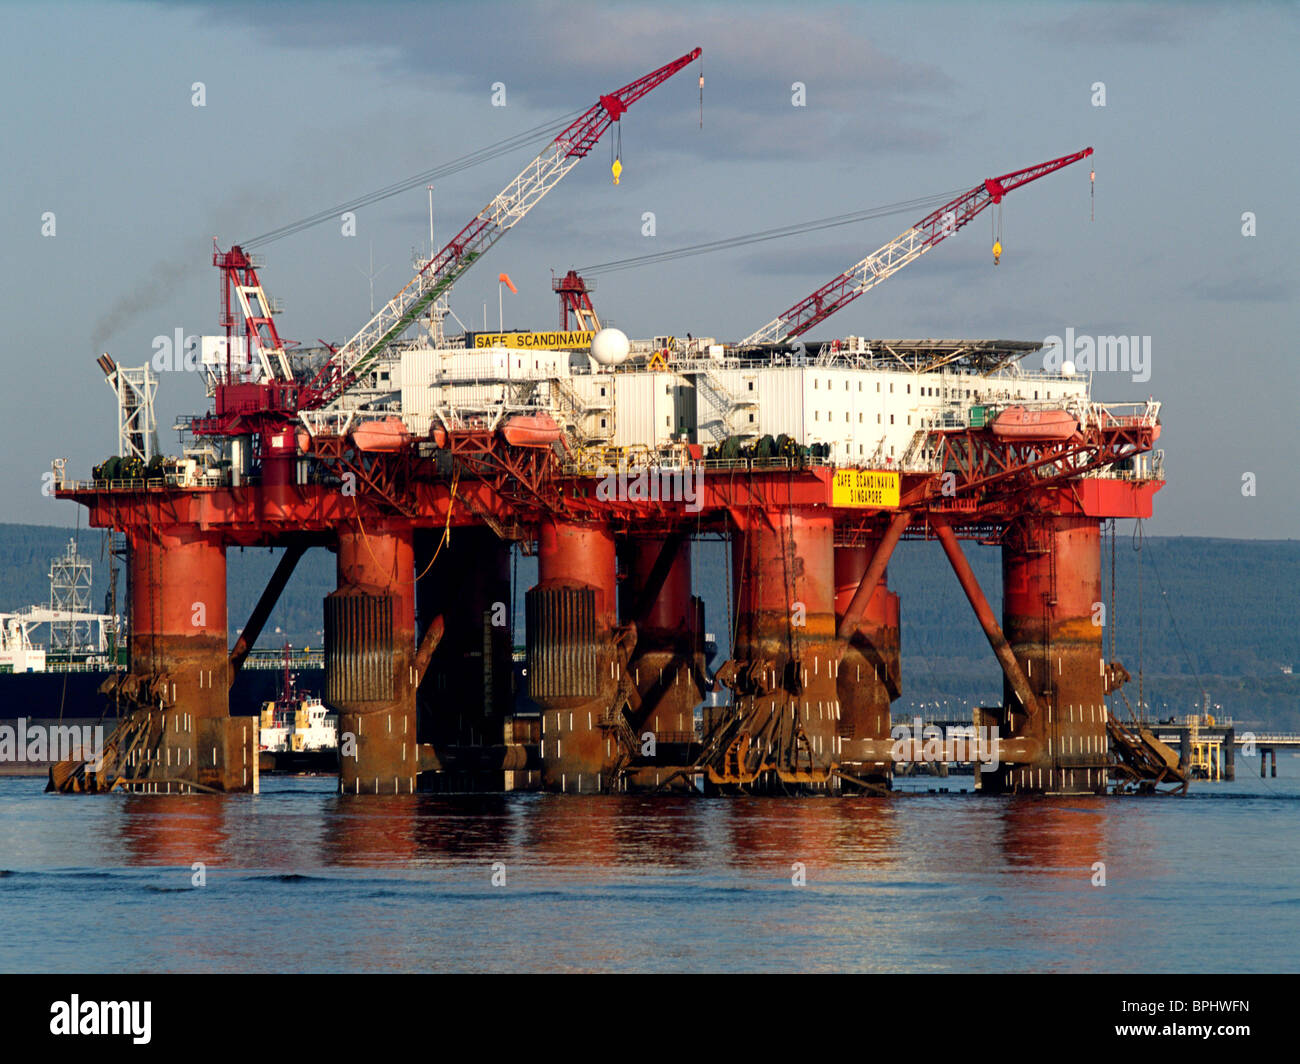 A Flotel, the Borgholm Dolphin, is towed past the Nigg Oil Terminal, in the Cromarty Firth, Scotland Stock Photo